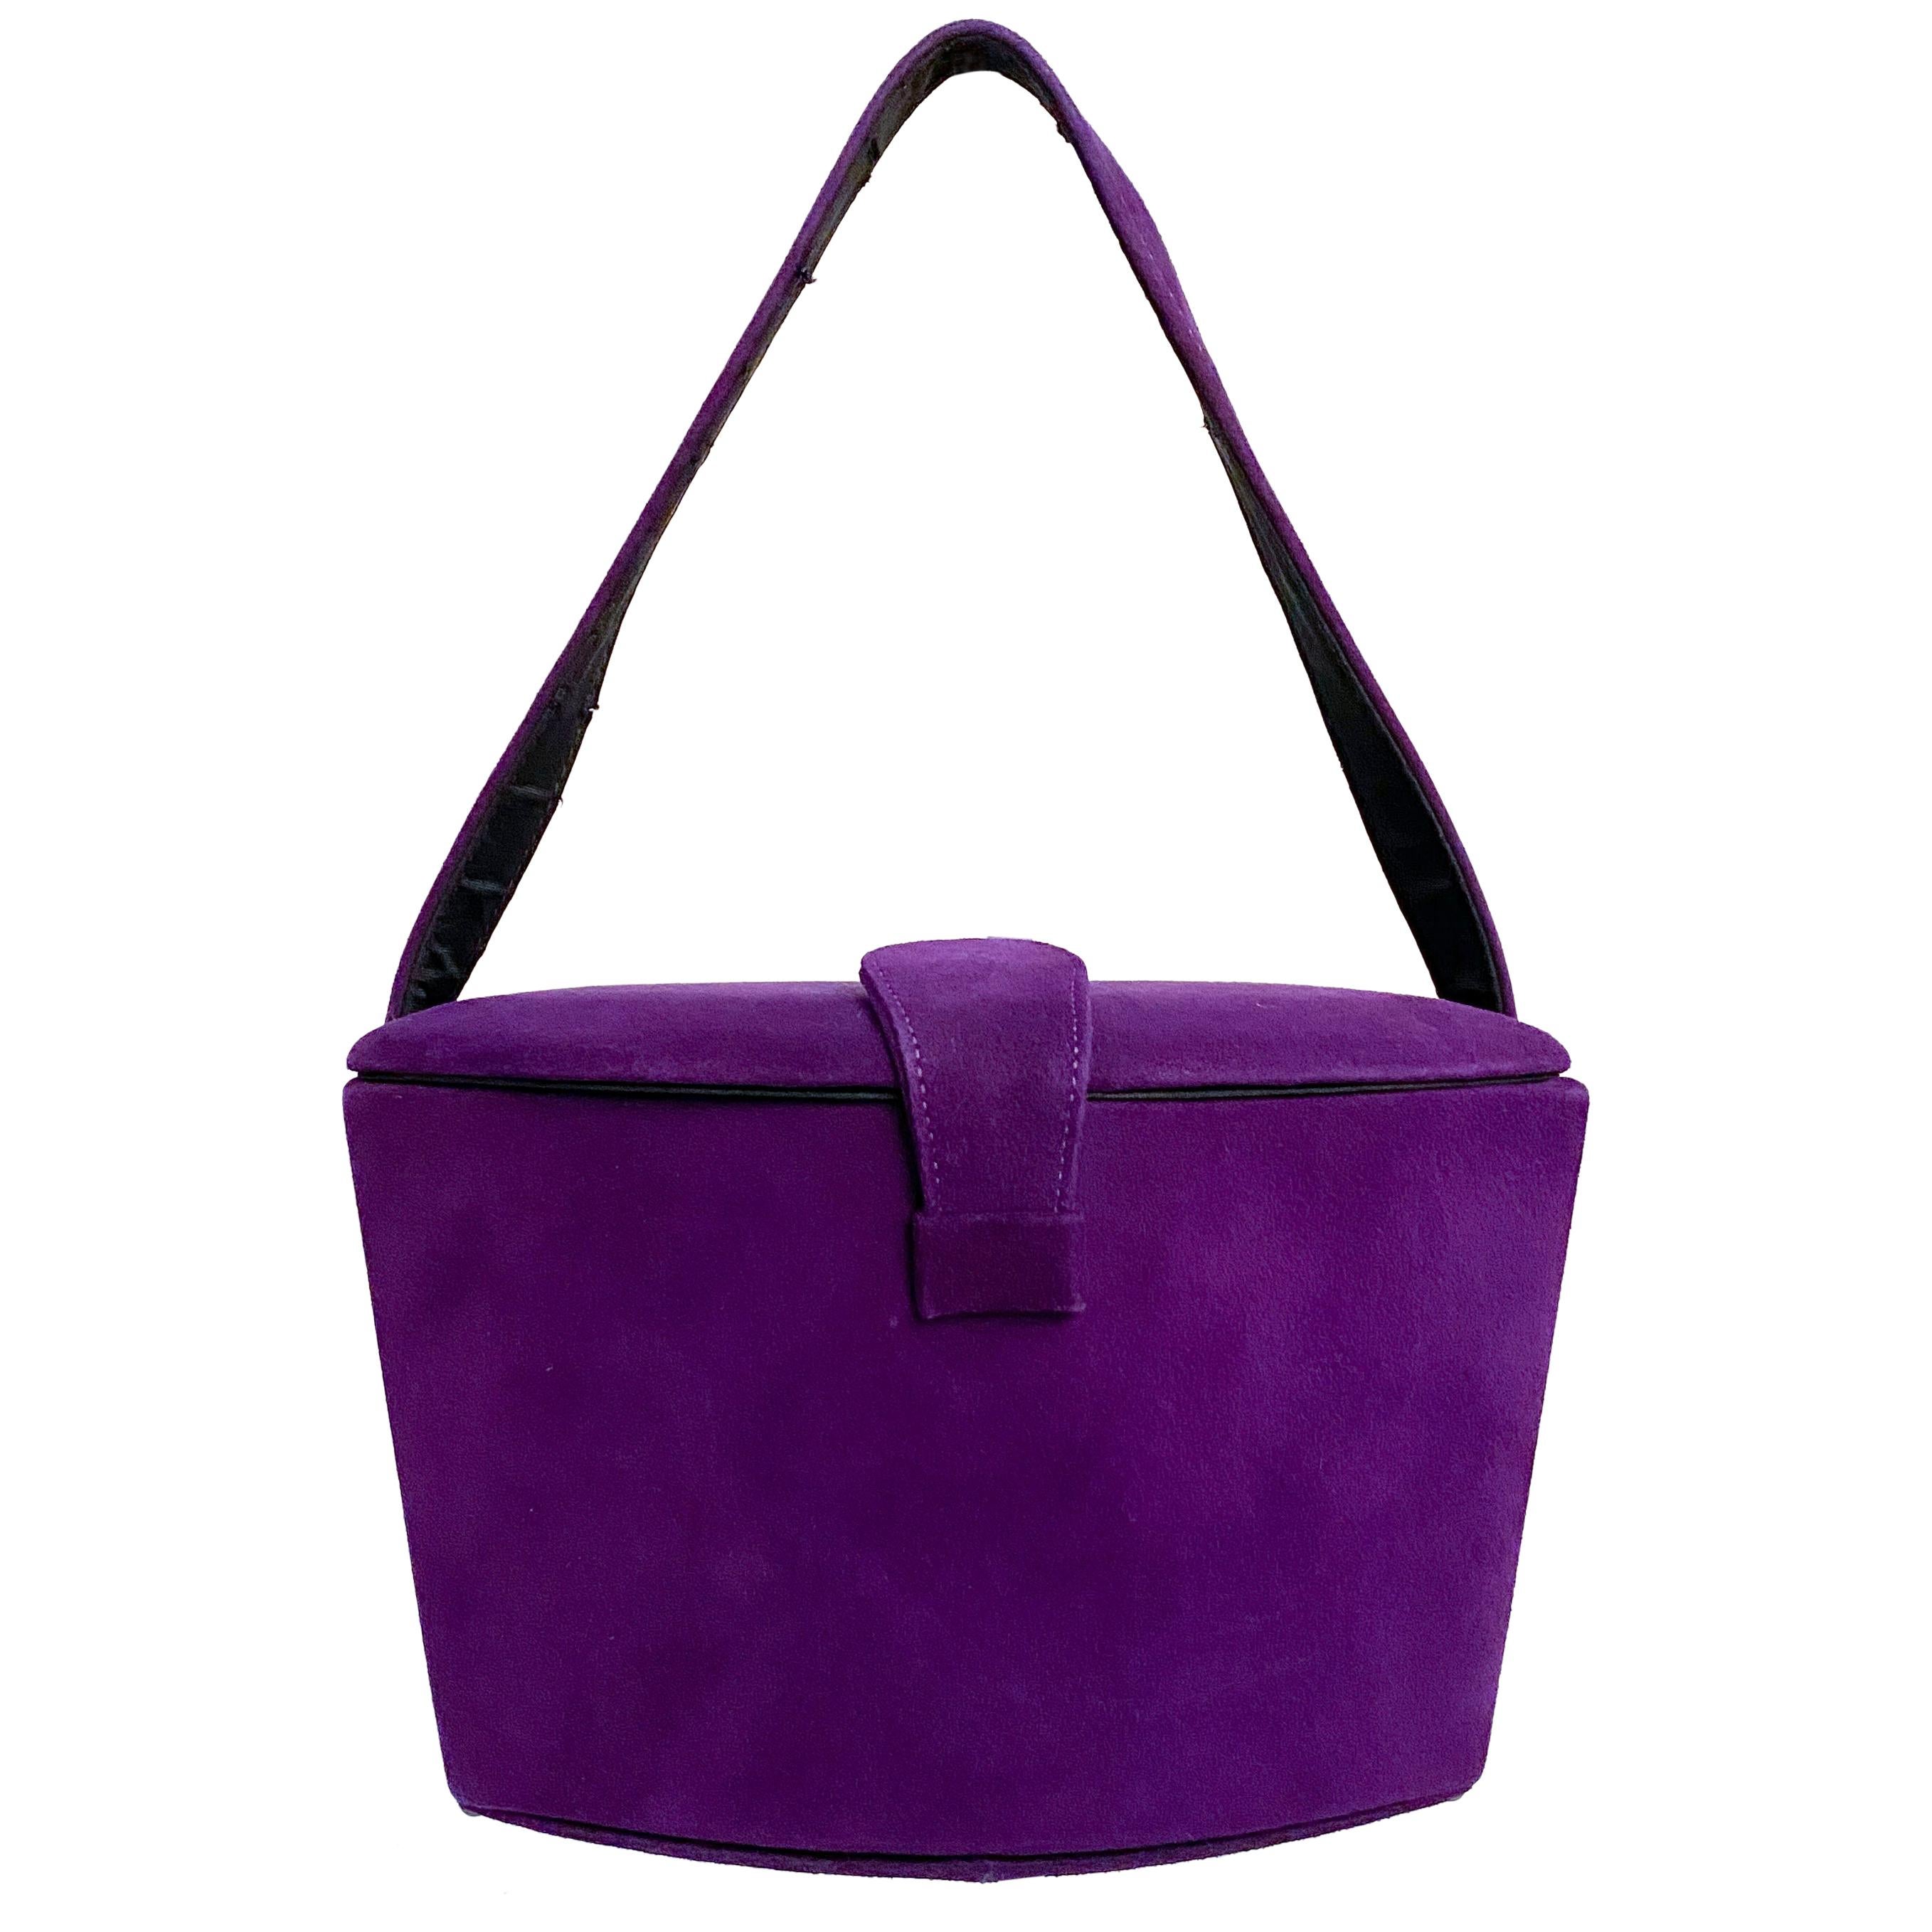 1950s French Perma-suede Purple Hand Bag